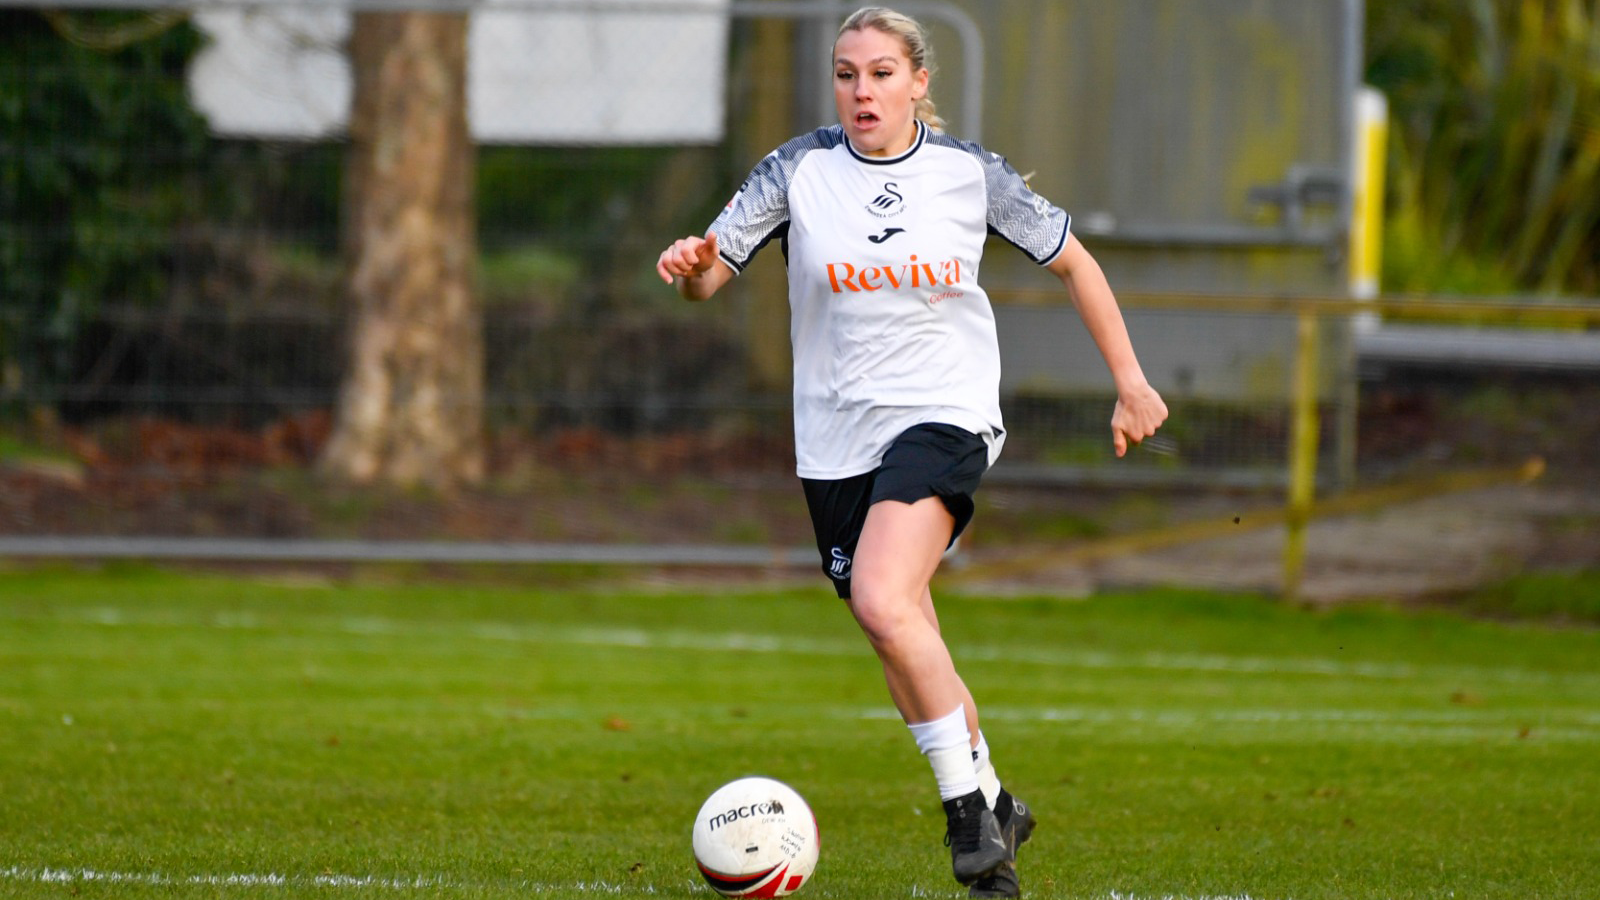 Ellie Lake | I want to contribute at both ends of the pitch | Swansea